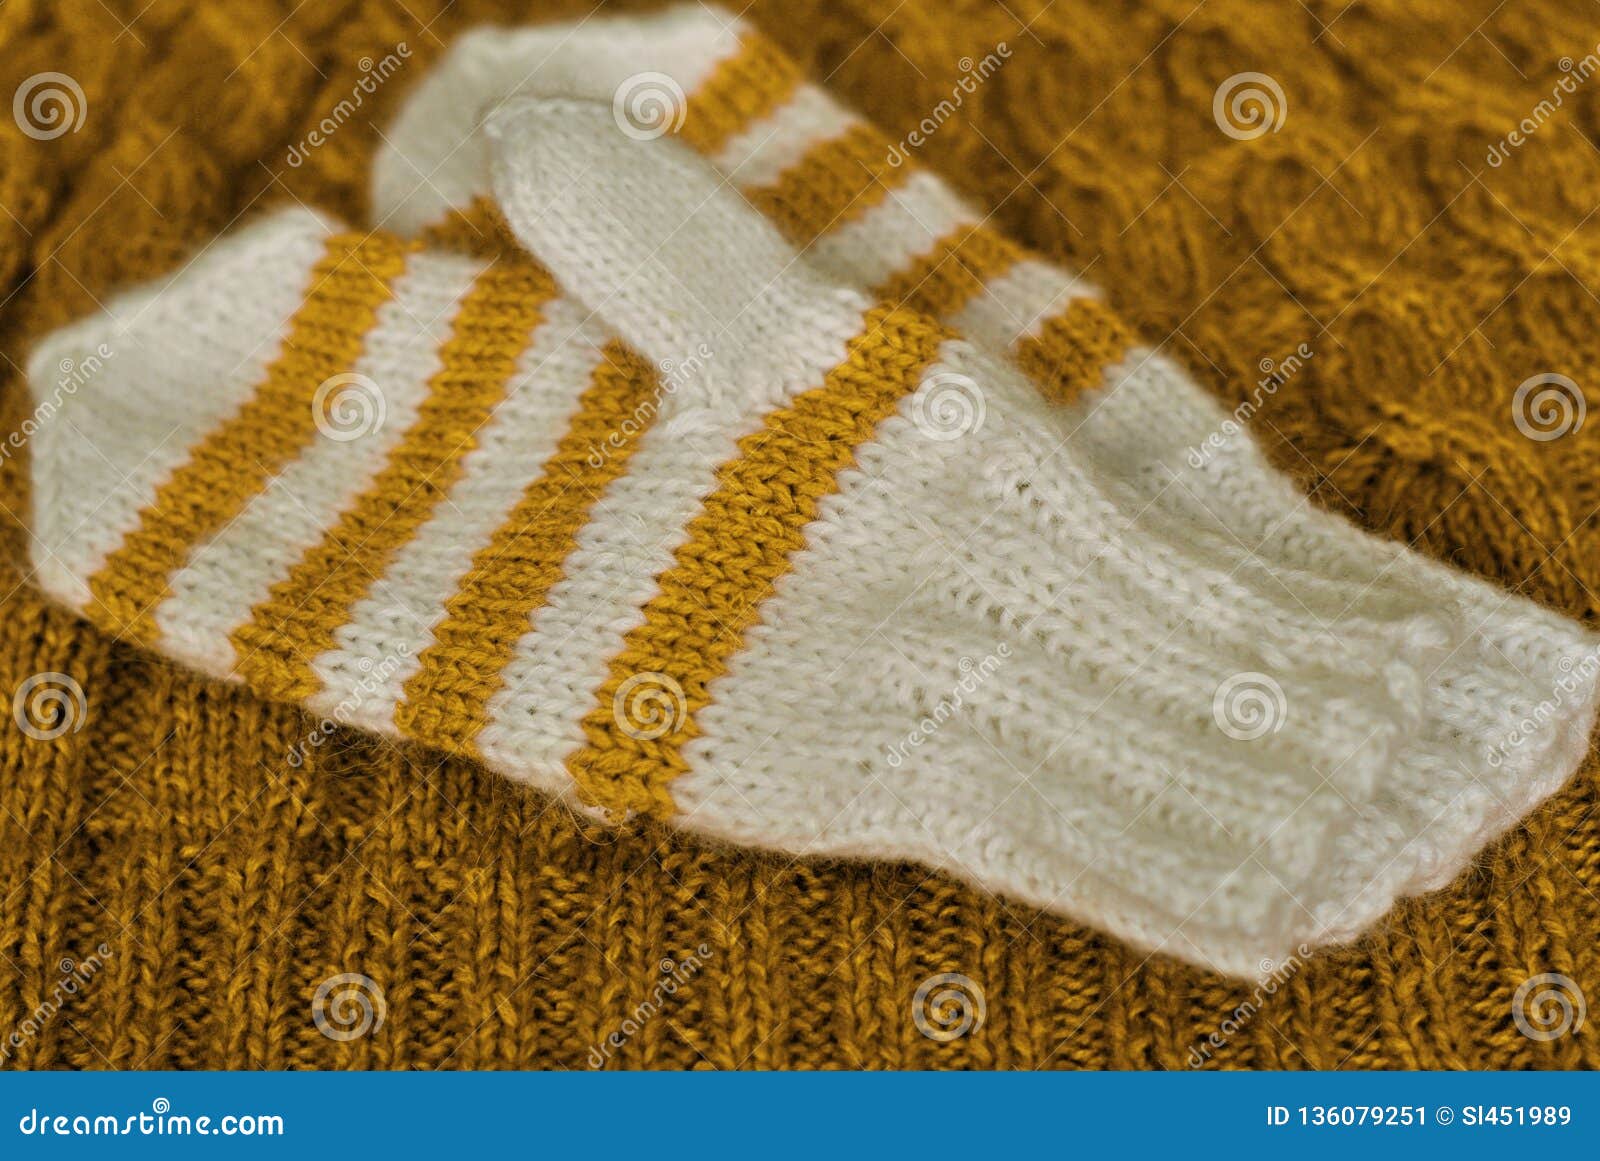 Knit Homemade Knitted Striped Mittens On Knitted Pattern